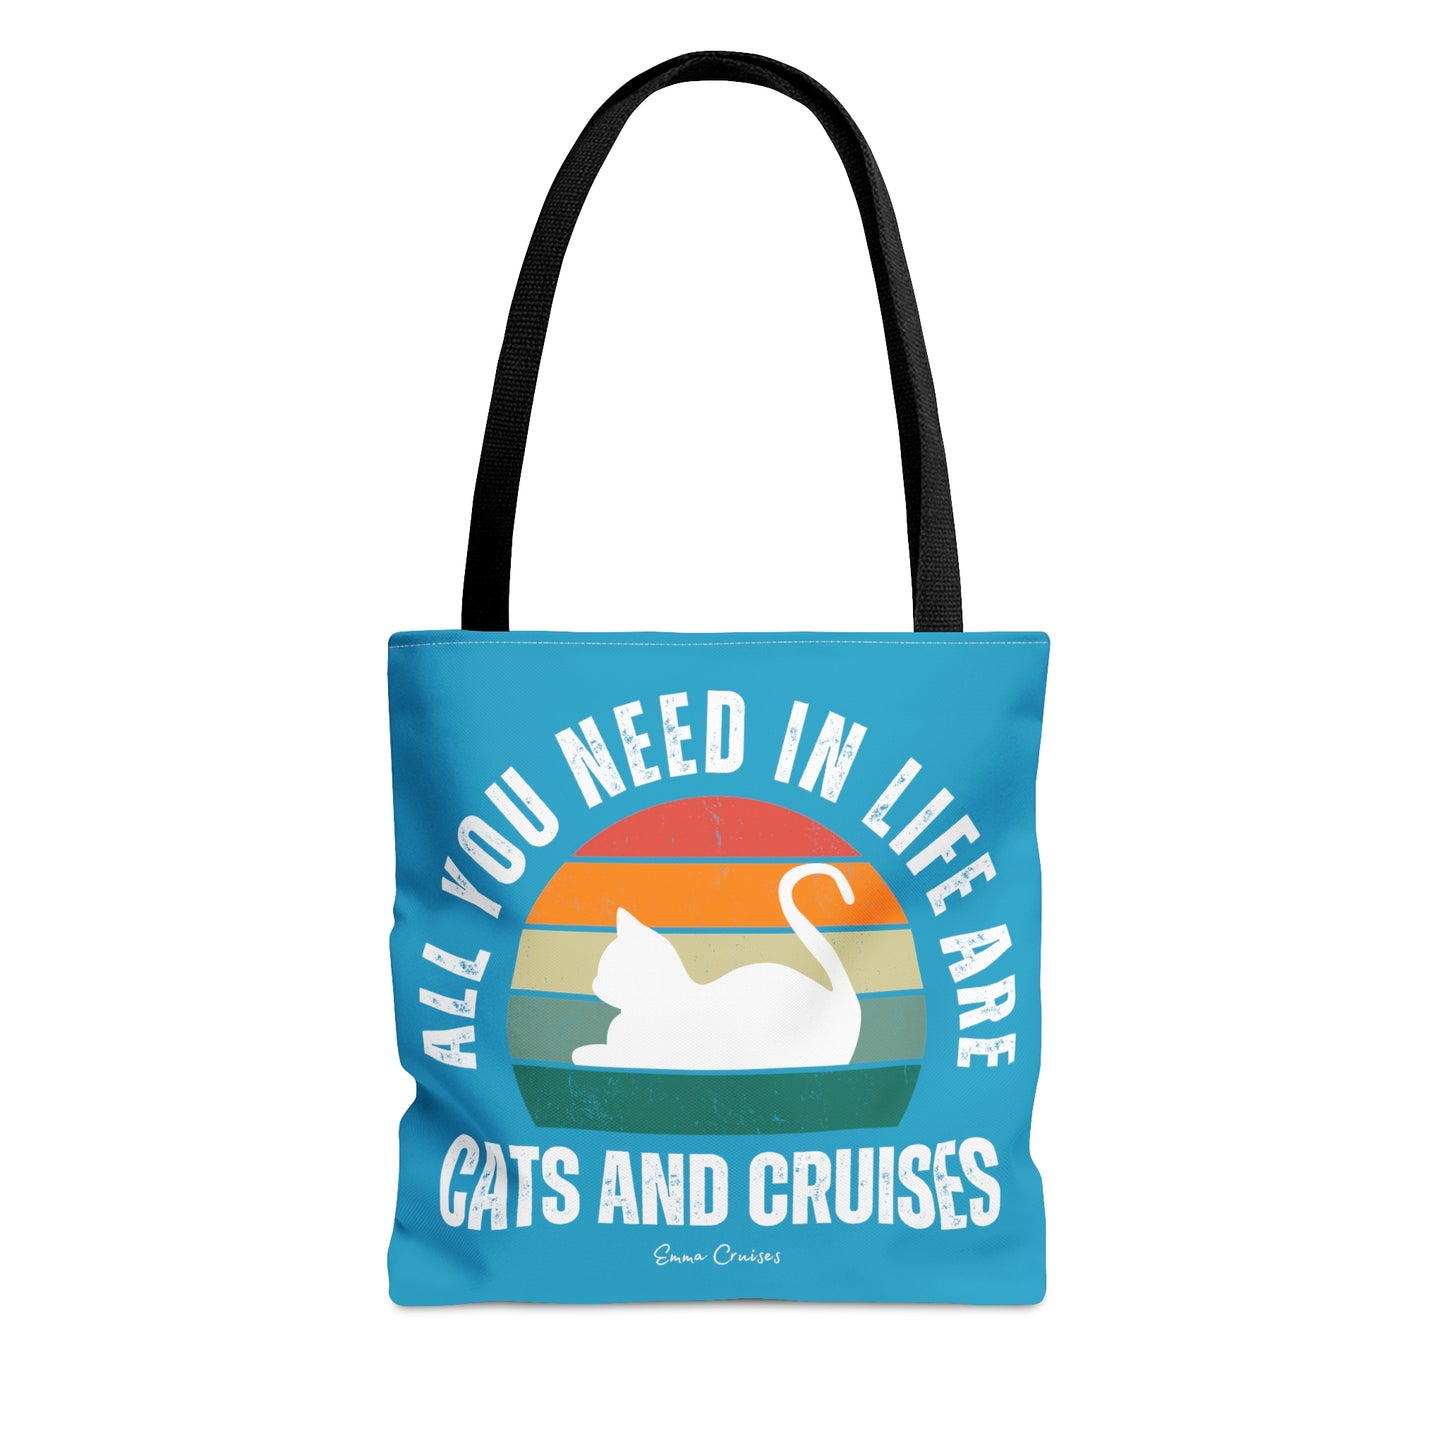 Cats and Cruises - Bag